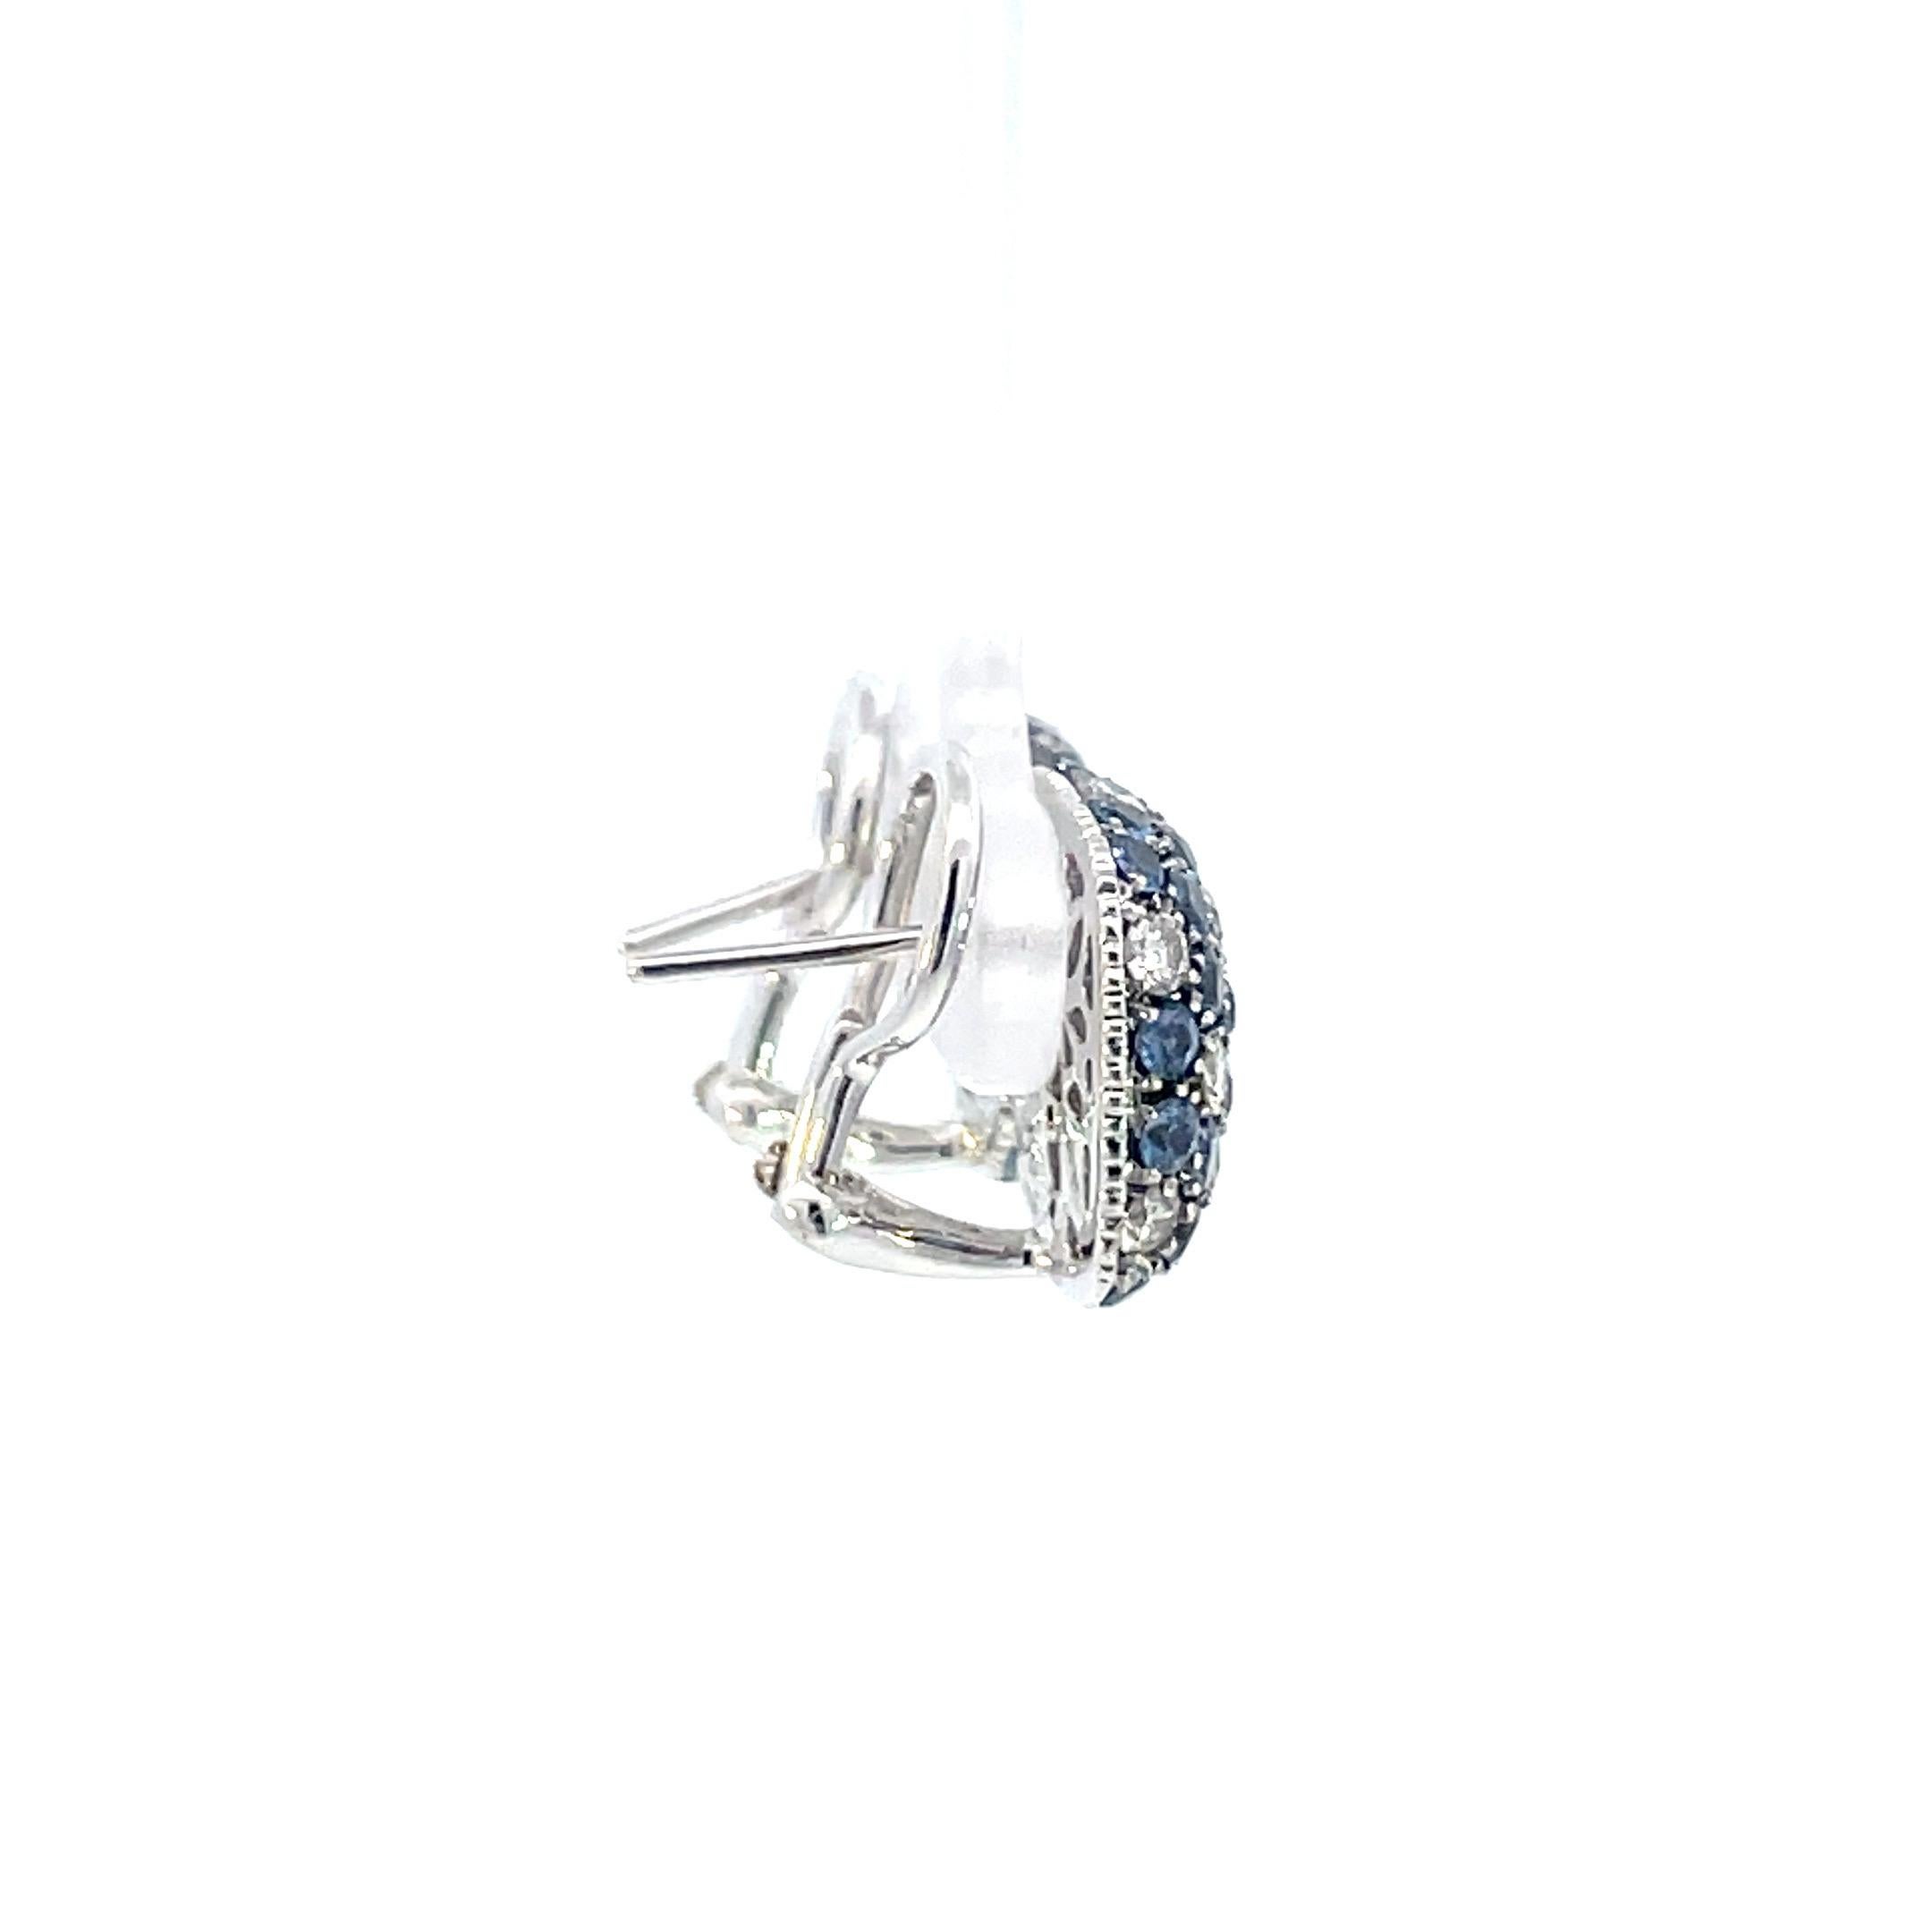 A pair of cushion shaped earring set with natural blue sapphires and brilliant cut diamonds in 18kt white gold with hand cut coin edge finish and a beautiful open designed gallery, straight post and omega clip system. 

64 natural blue sapphires